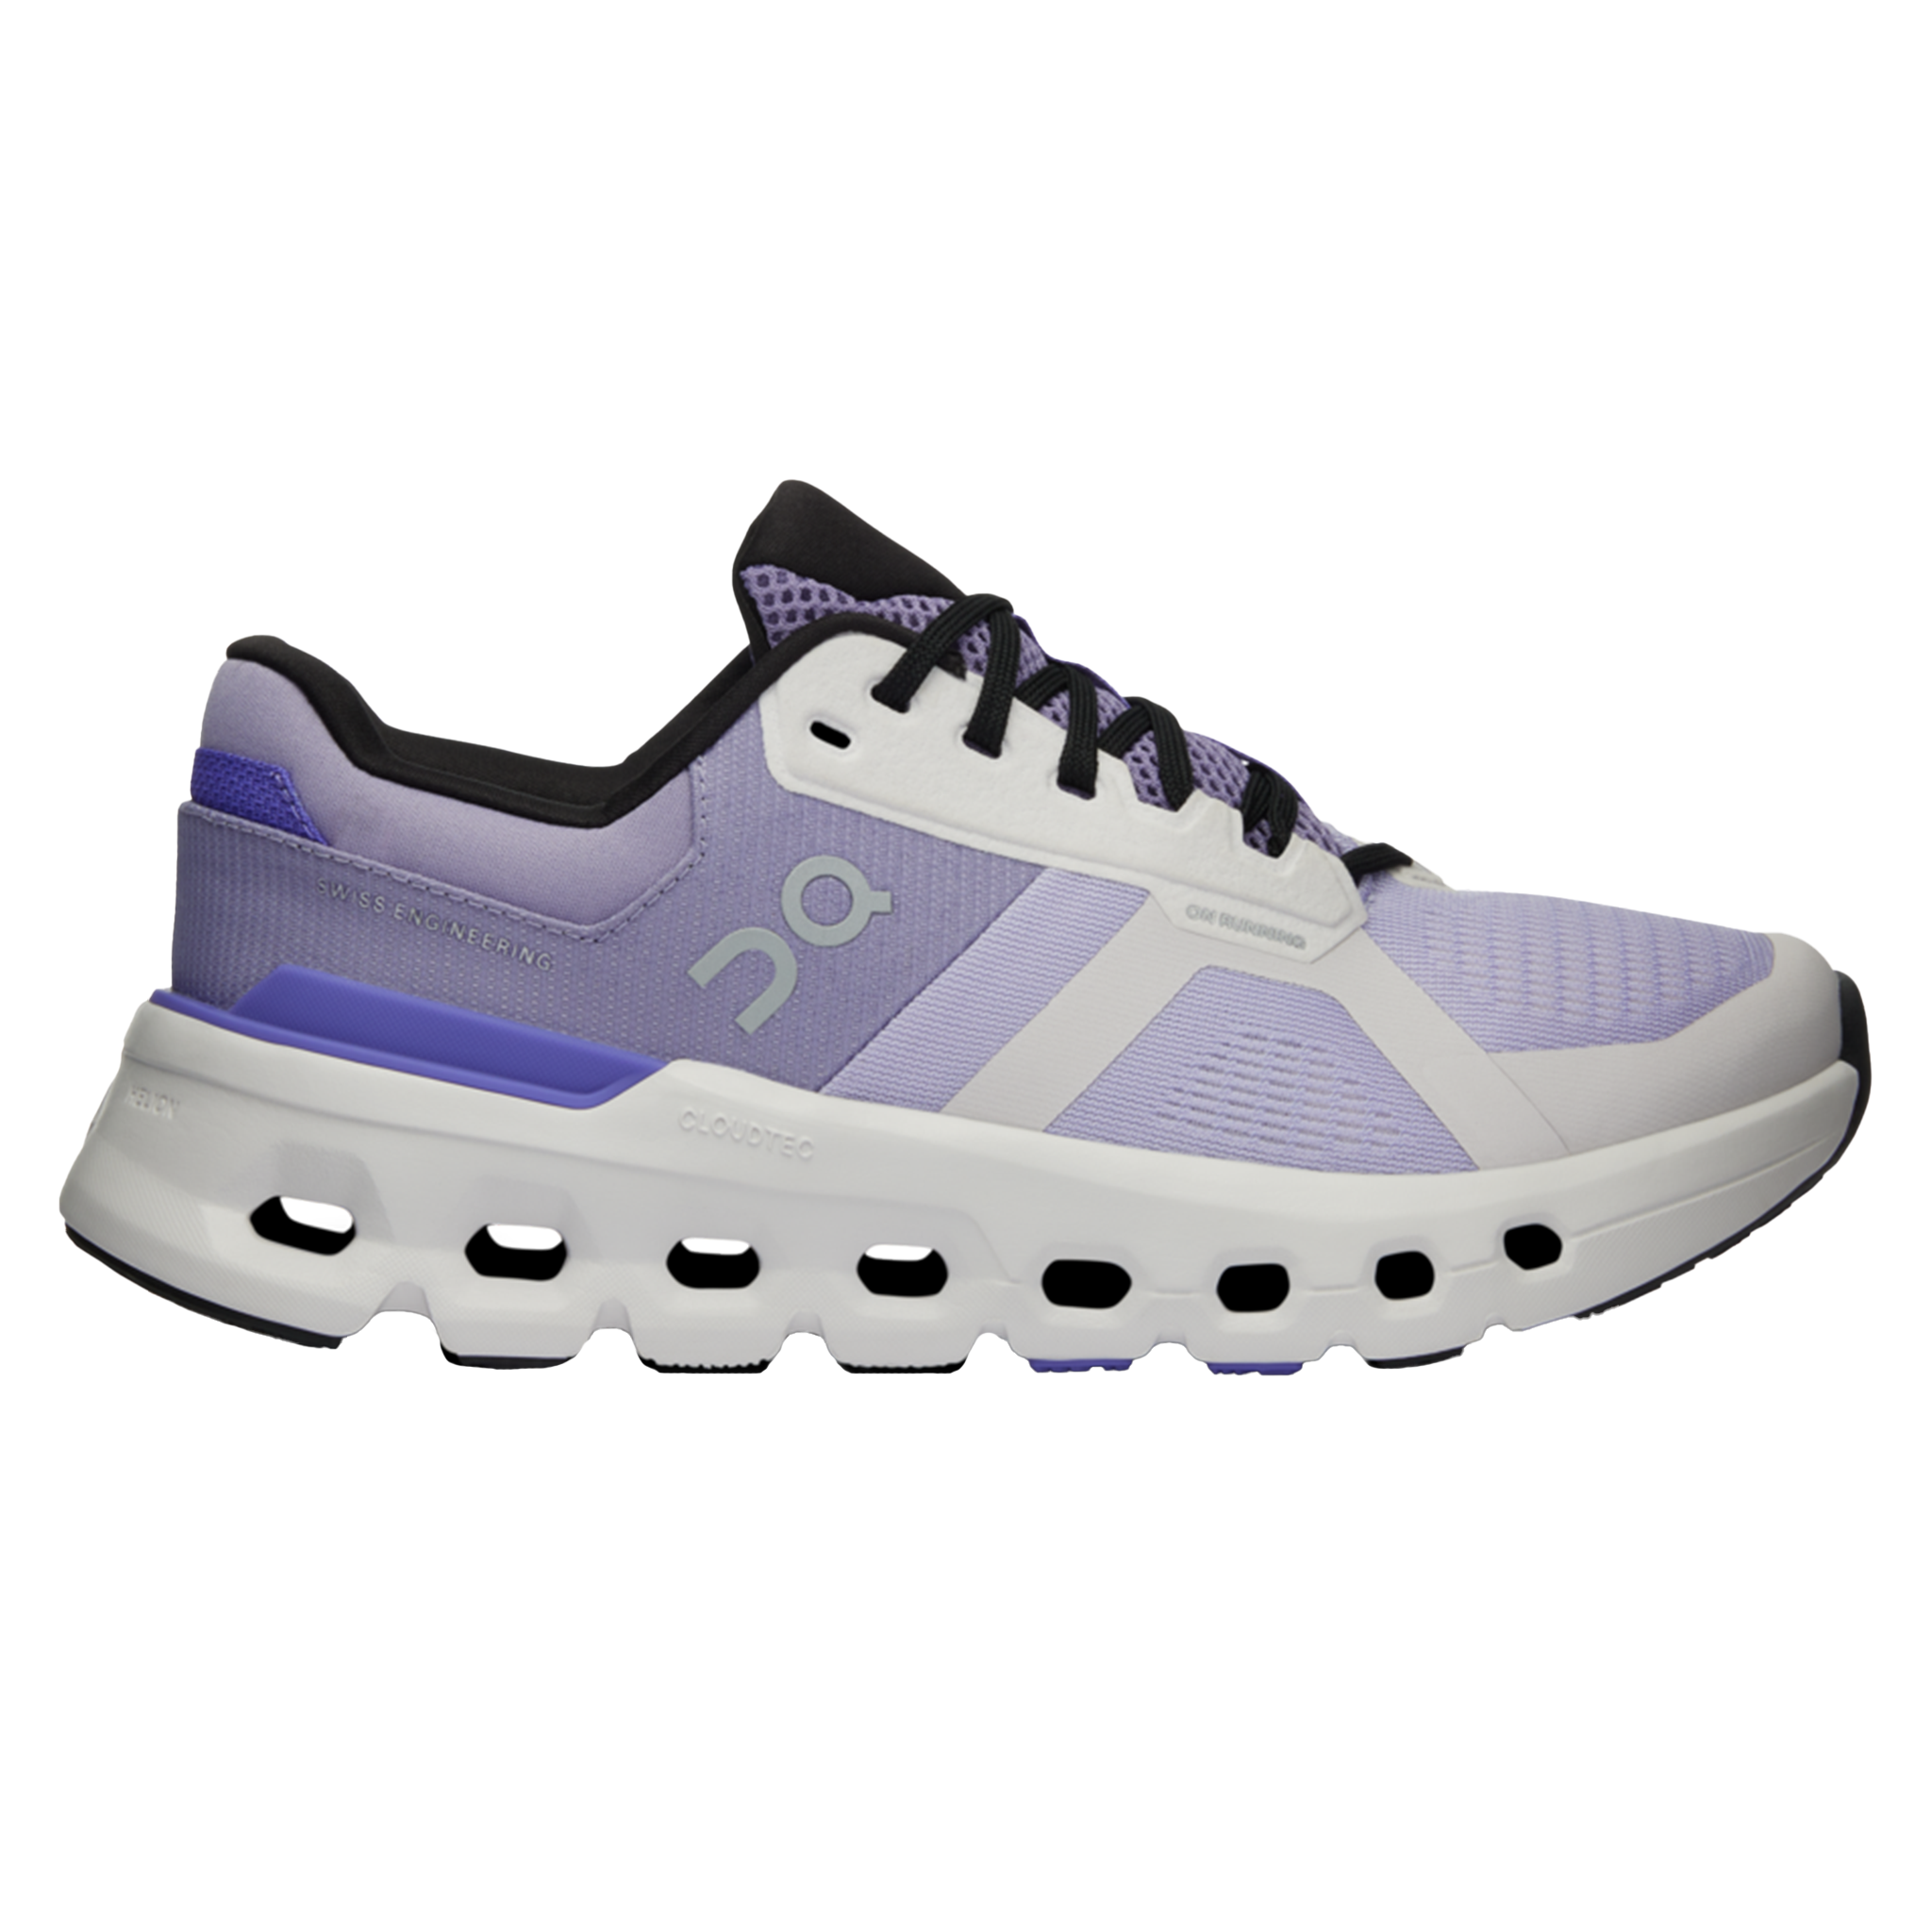 ON Womens Cloudrunner 2 - Nimbus/Blueberry - Stability